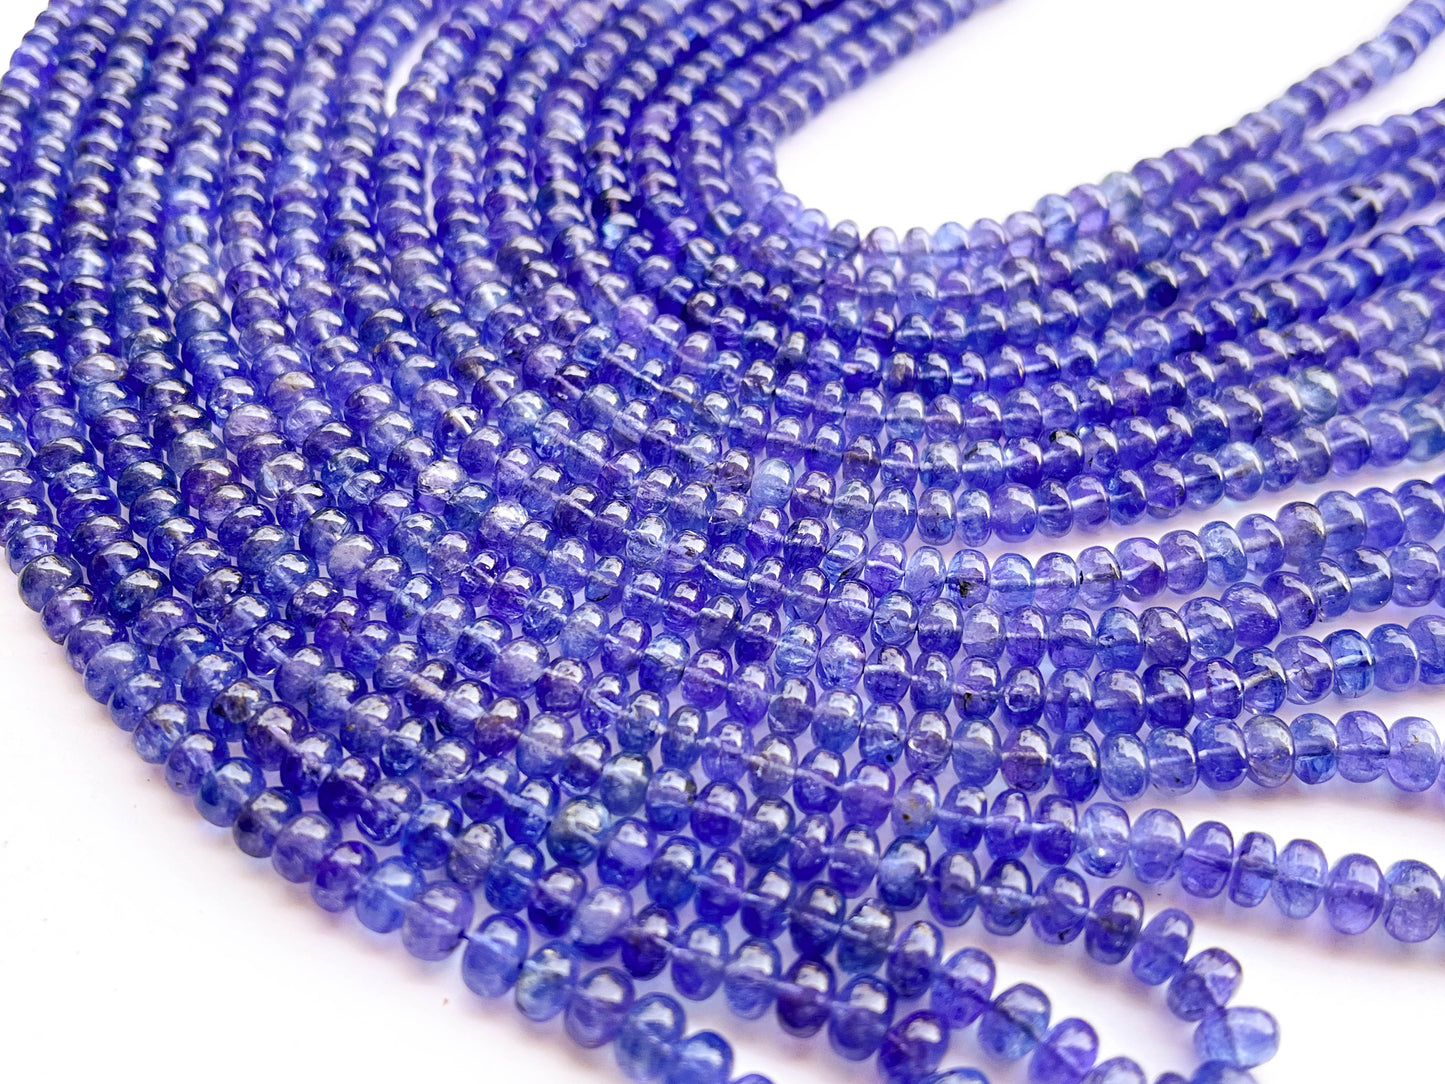 AAA Tanzanite Smooth Rondelle Beads, 17 Inch, 4mm to 6mm, Natural Tanzanite Gemstone Beadsforyourjewelry